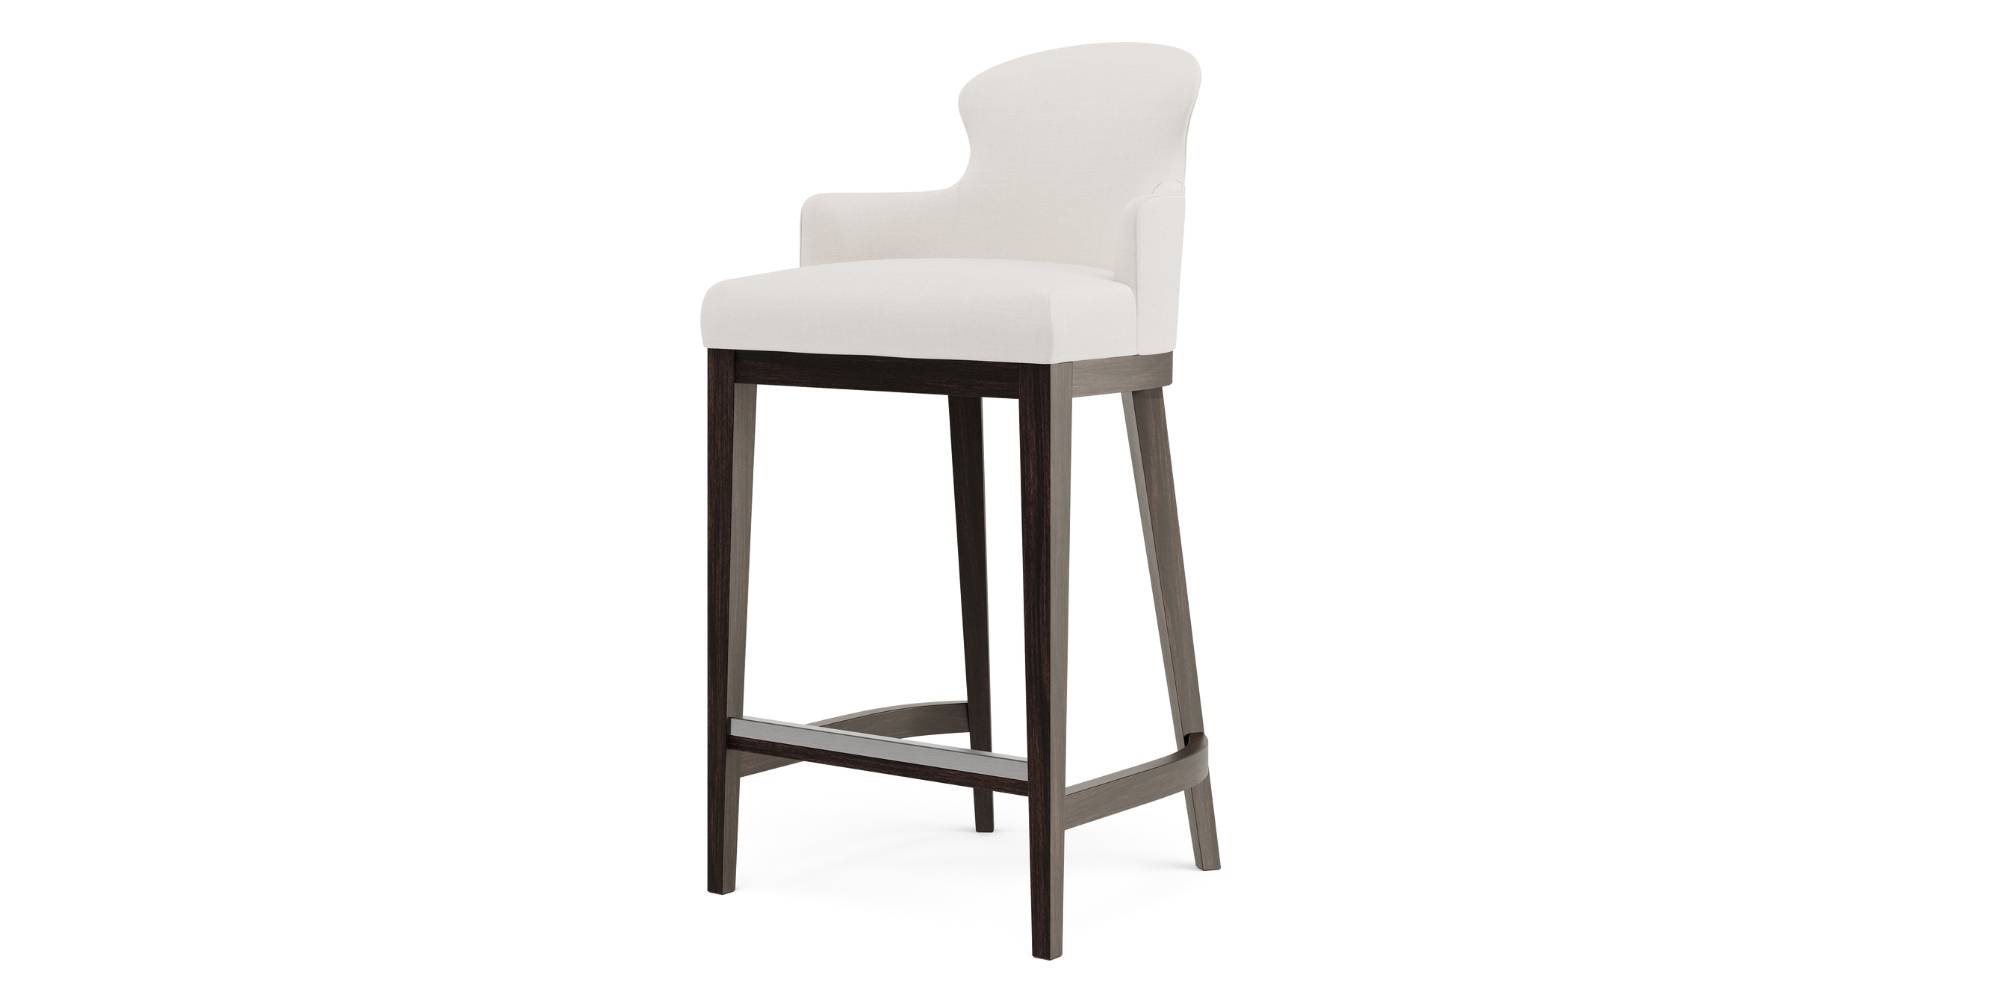 Tamarindo Barstool With Swivel in Outdoor Bar Stools for Tamarindo collection